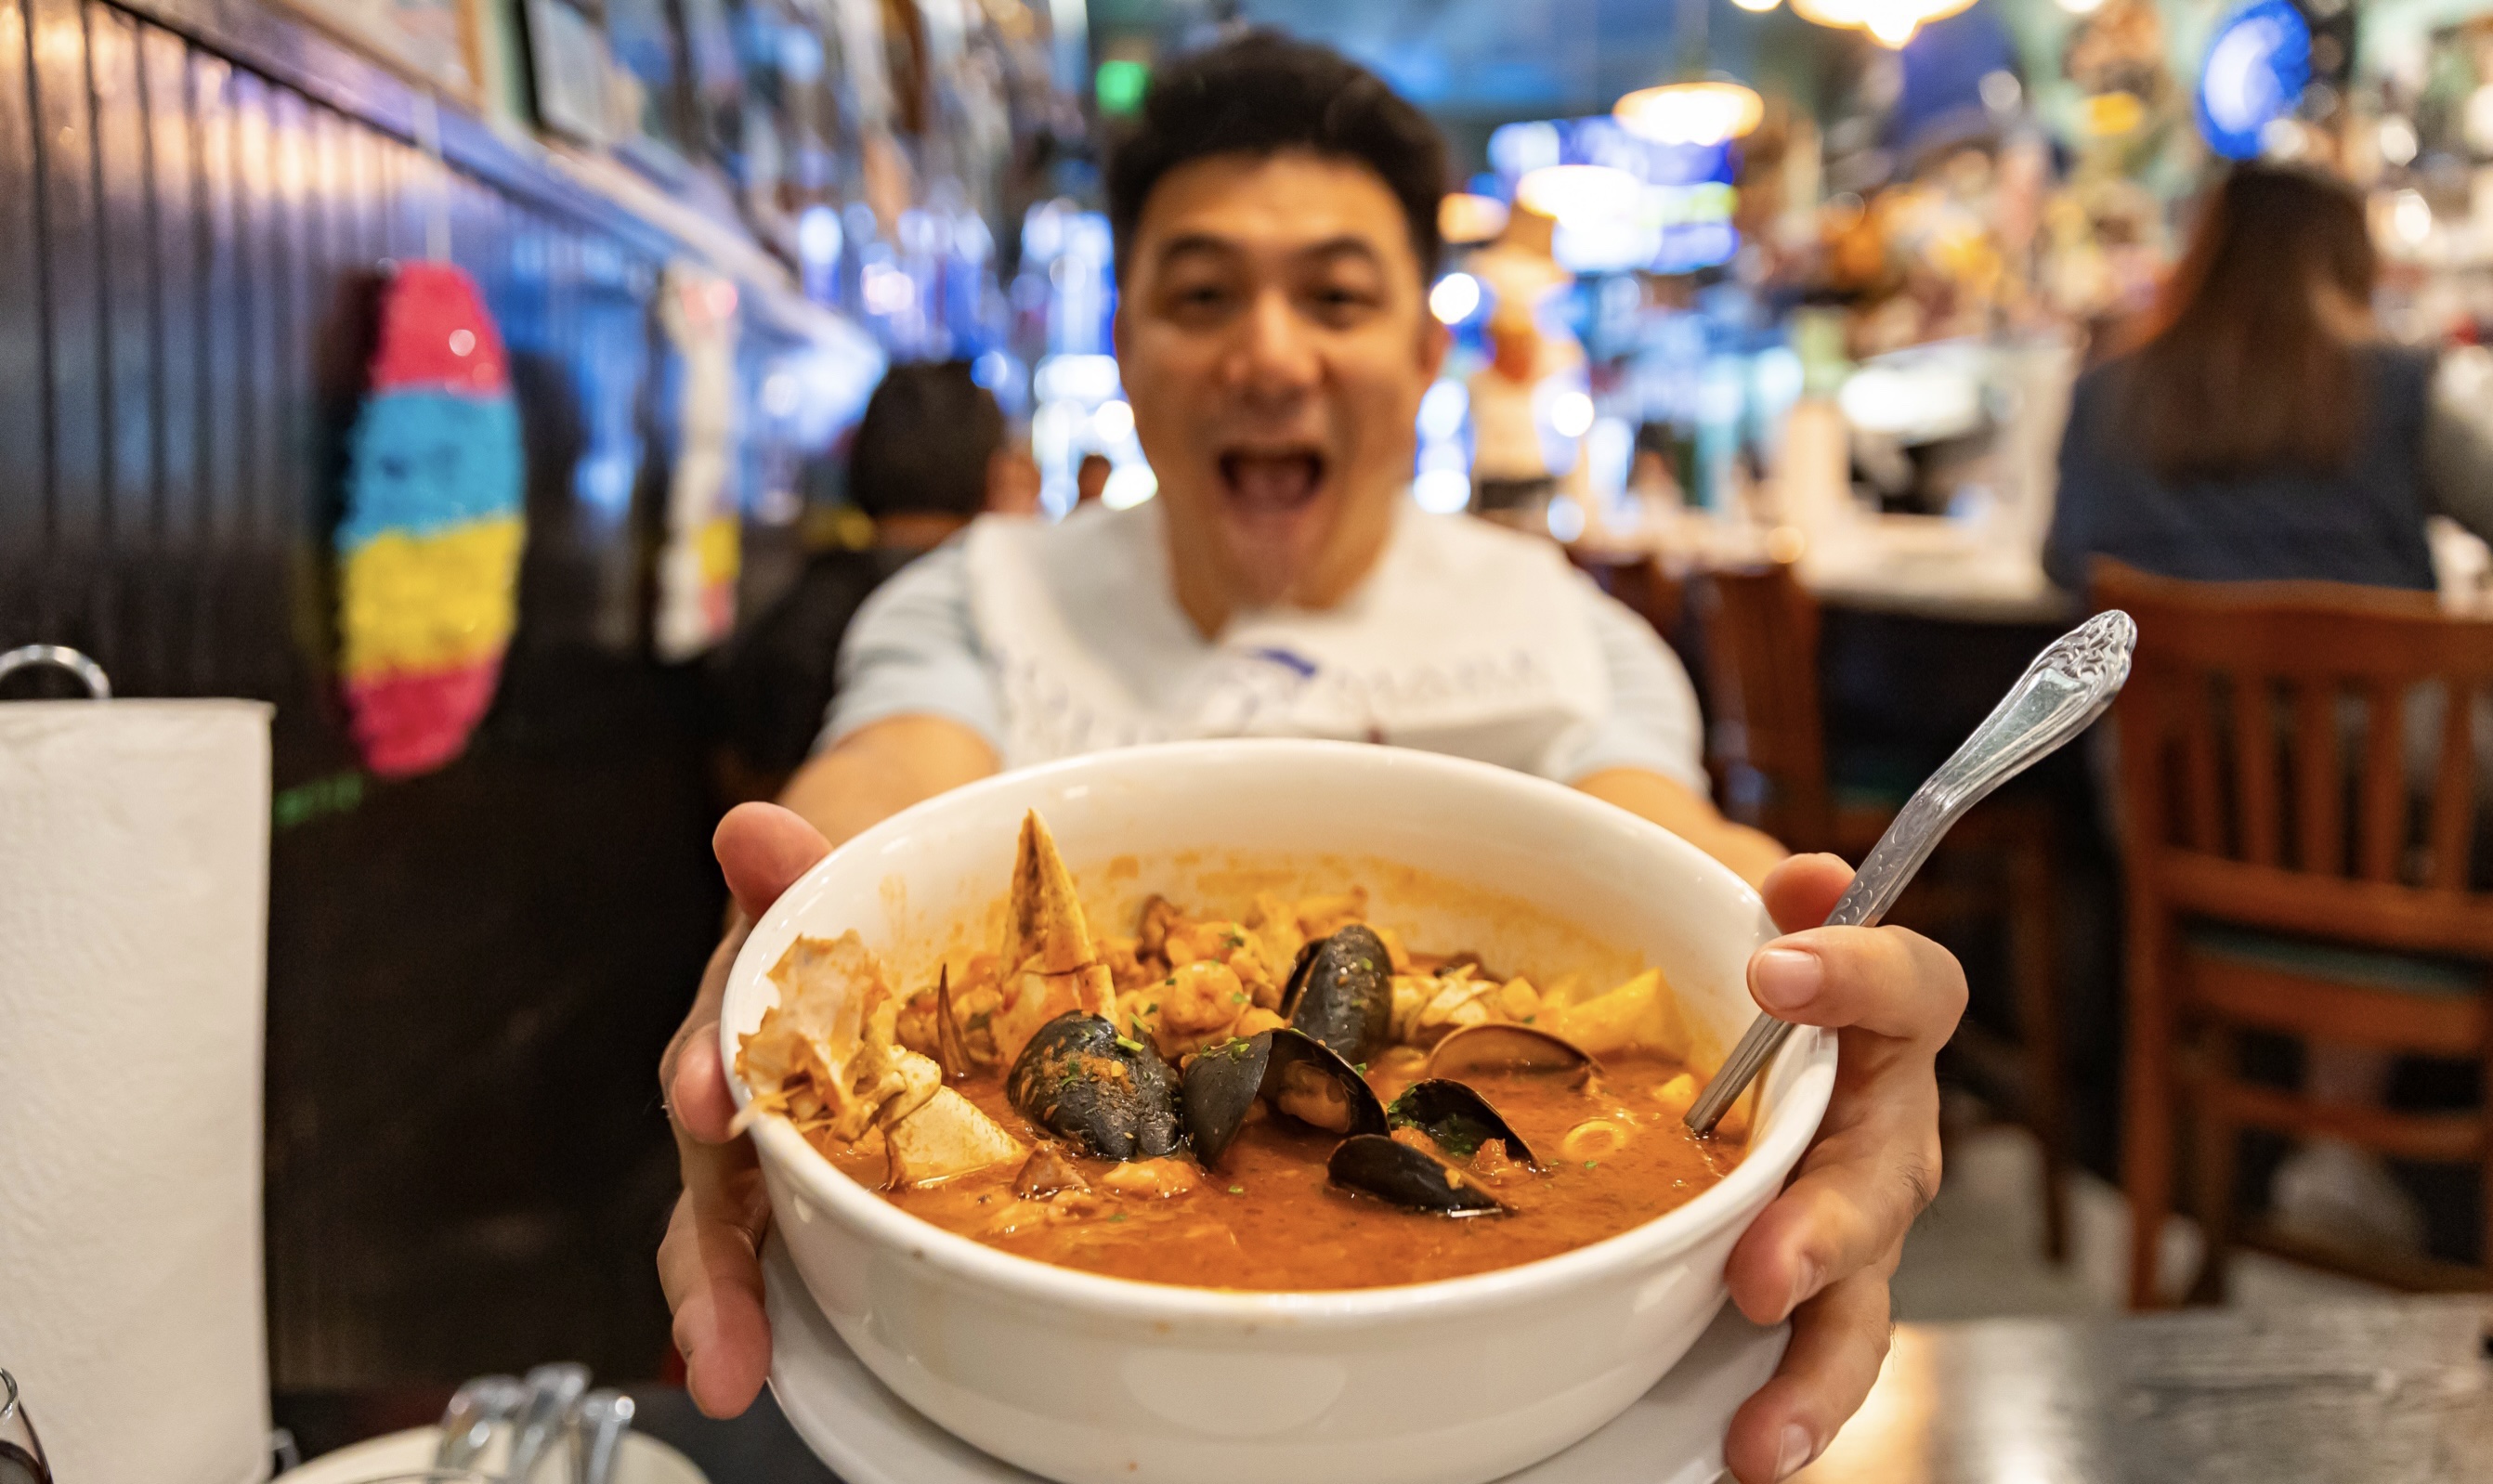 A man excitedly presents a large bowl of seafood soup, prominently displaying mussels and rich broth, in a vibrant, decorated restaurant.